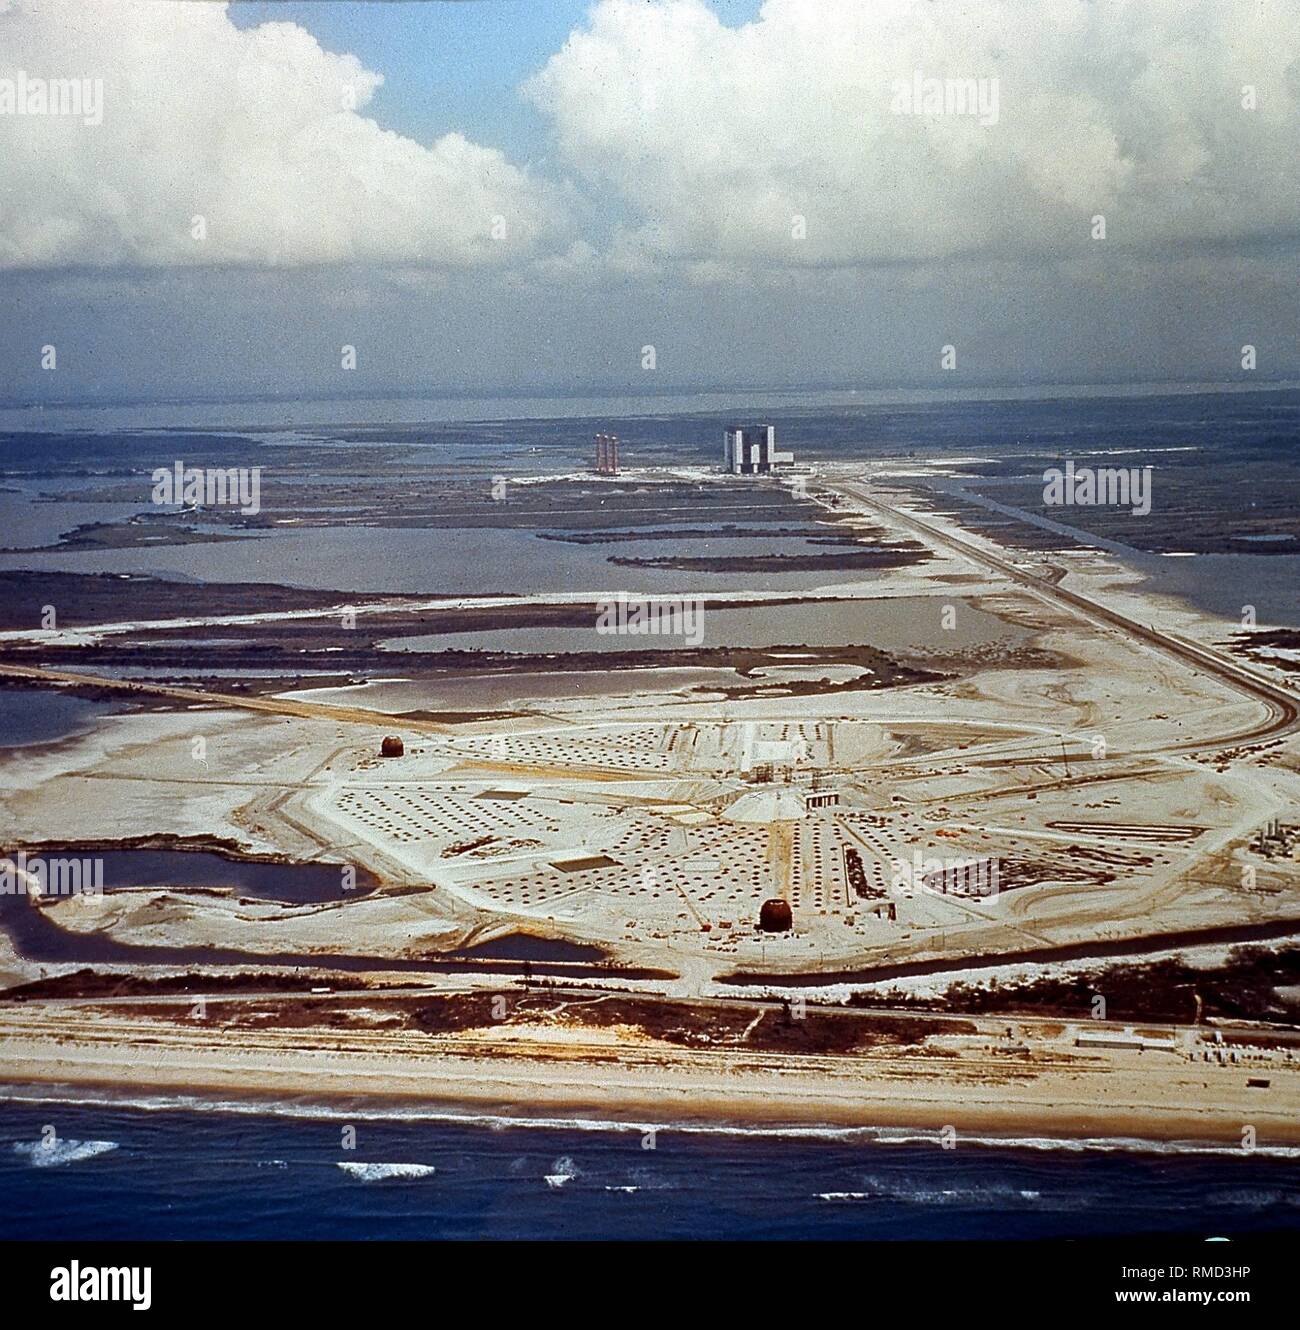 Overview of the Launch Site A of the launch pad at John F. Kennedy Space Center. In the background, the assembly hall for spacecrafts, and to the left next to it, the three mobile rocket launch pads. Undated photo, probably from the 1980s. Stock Photo